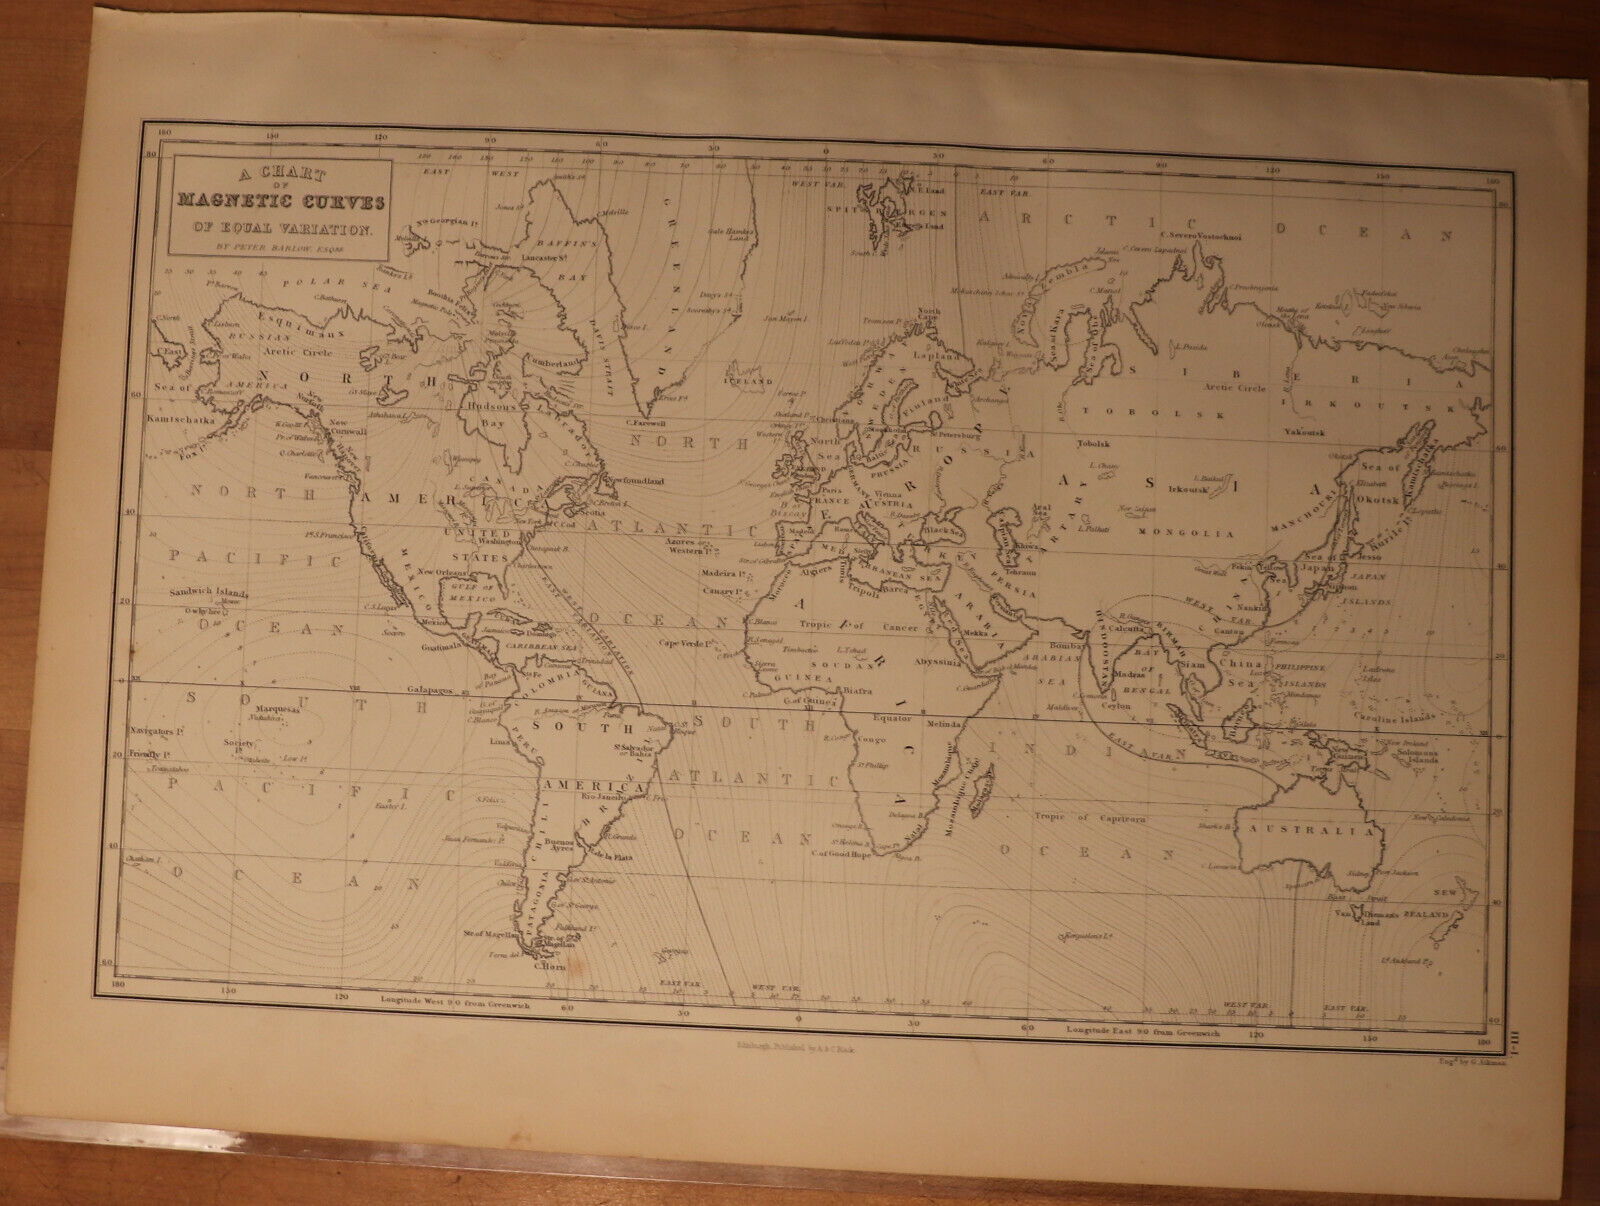 1856 Black's World Projection with Magnetic Curves - Map 17.2" x 12.6"